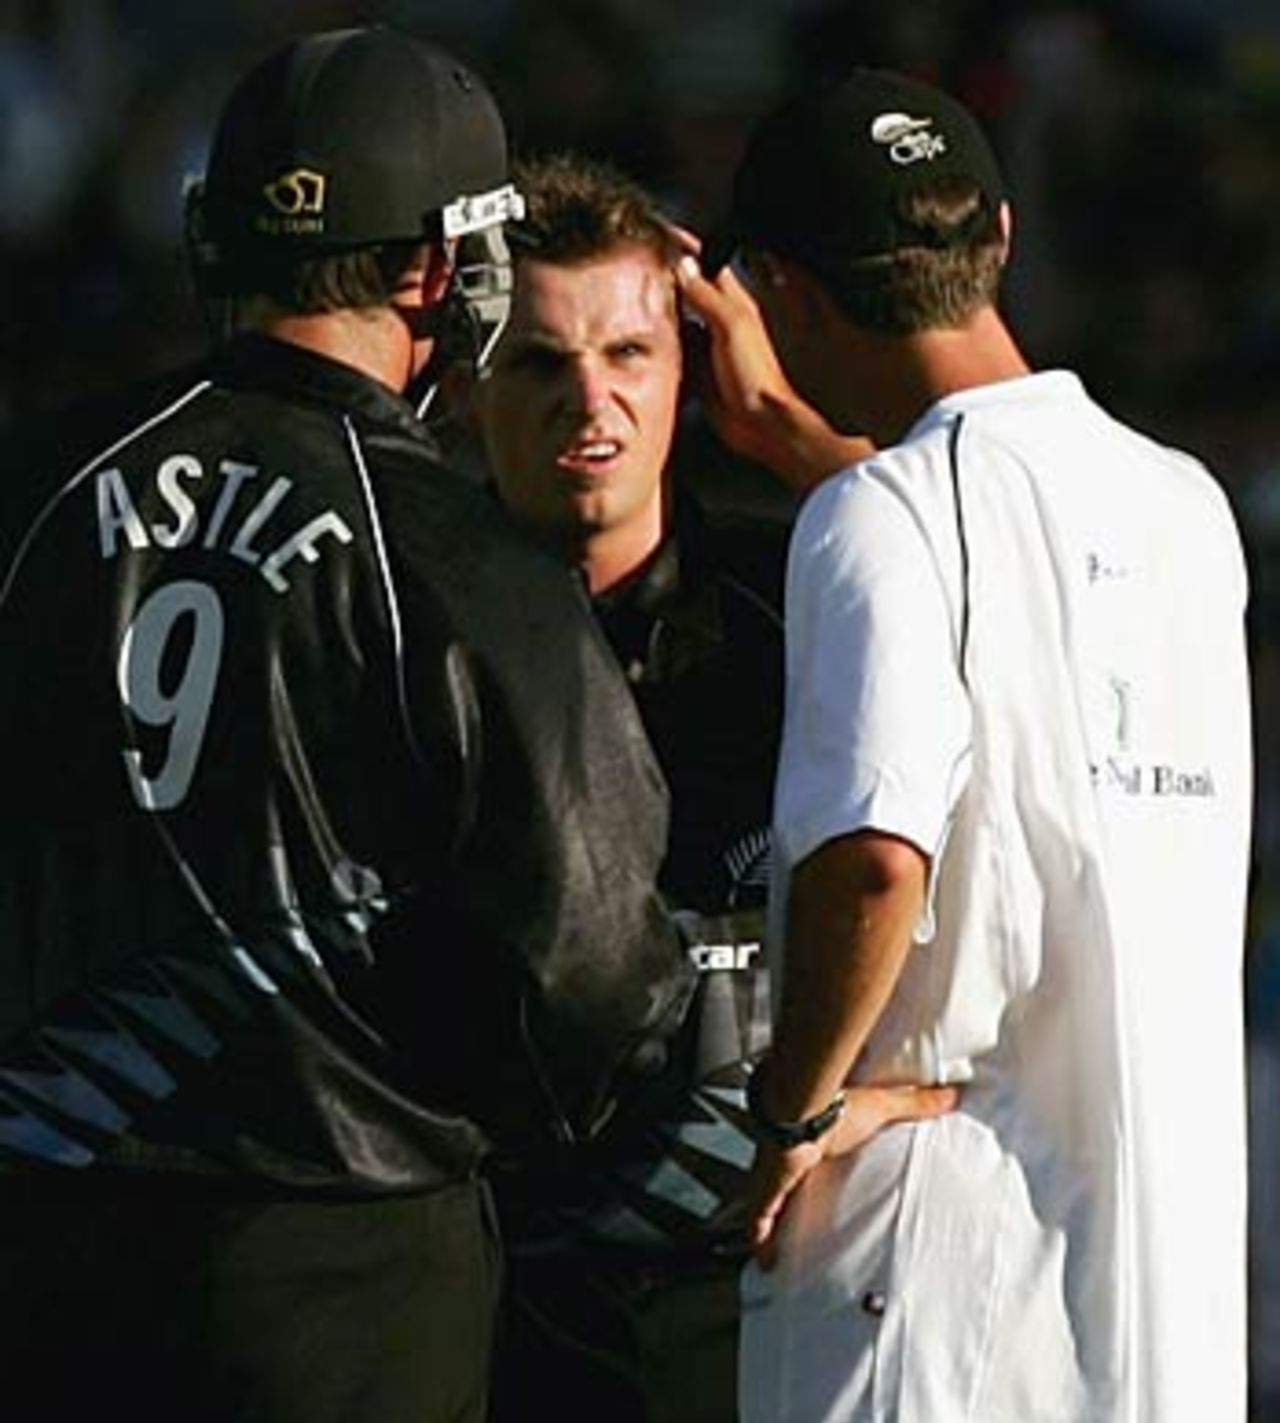 Michael Papps receives treatment after being struck by Brett Lee, New Zealand v Australia, 3rd ODI, Auckland, February 26, 2005